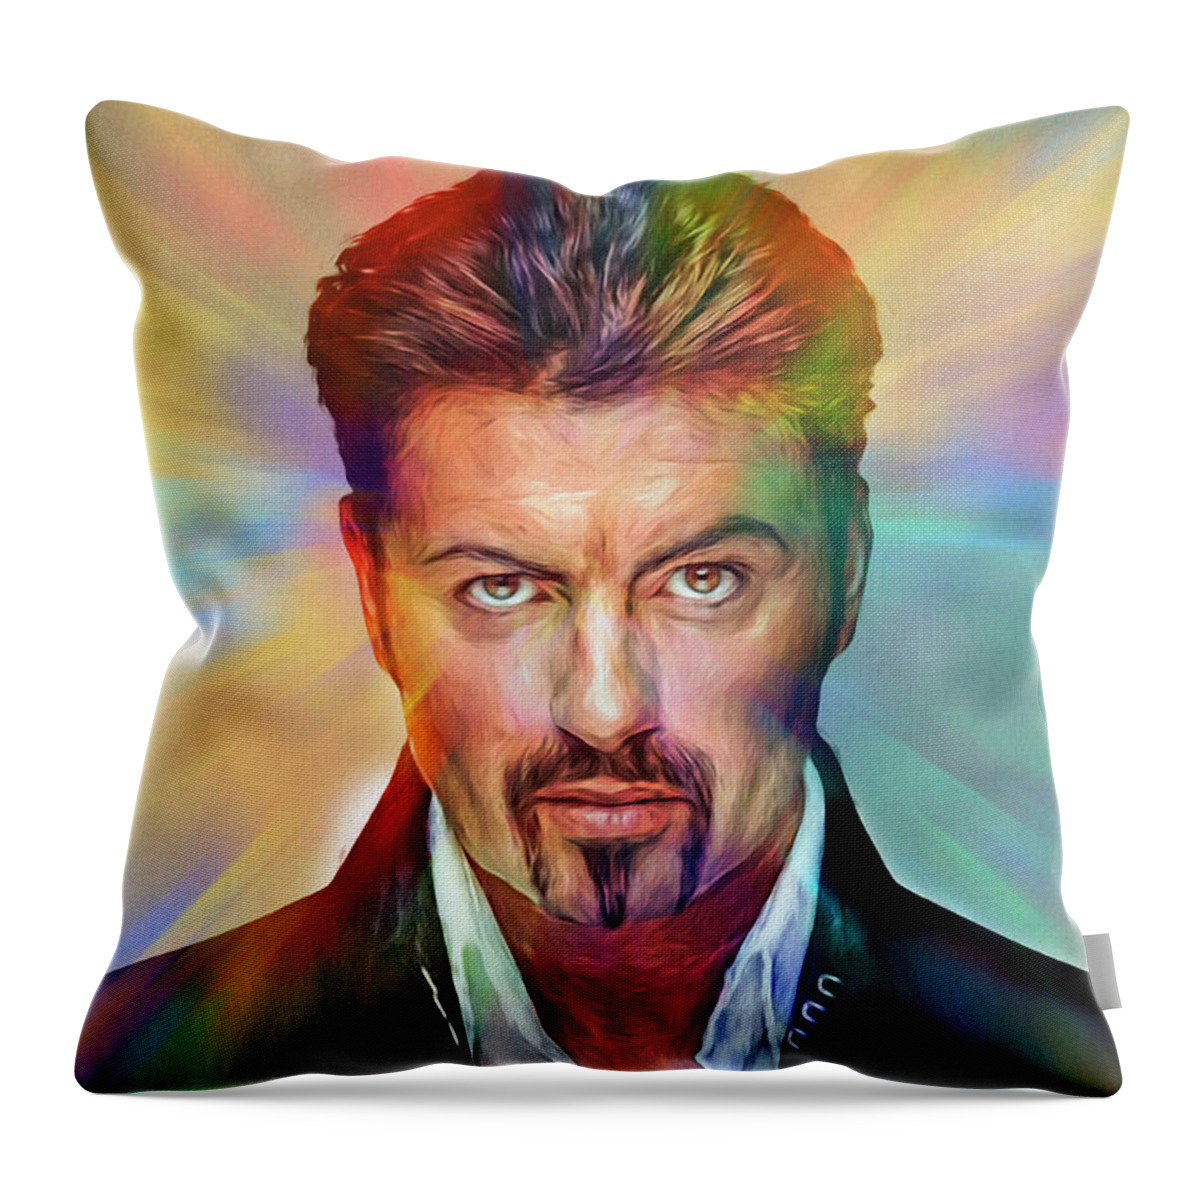 George Michael Throw Pillow featuring the mixed media George Michael by Mal Bray